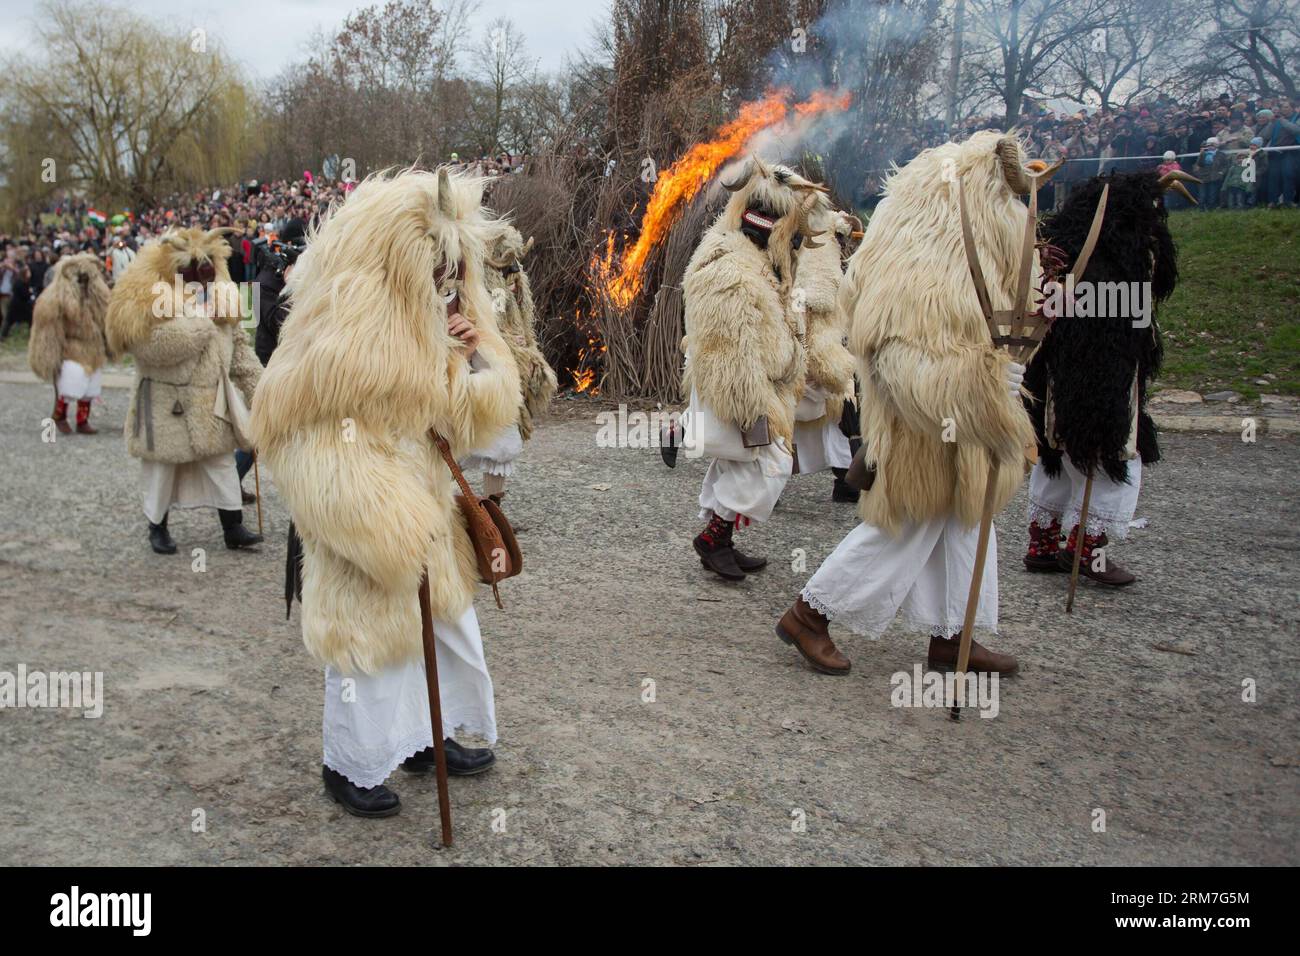 Masked busos (people wearing sheep fur and wooden masks) celebrate the traditional Buso Carnival in Mohacs, southern Hungary on March 2, 2014. The Buso Carnival is an annual celebration of Sokac ethnic group living in Mohacs to bid farewell to winter and welcome spring. According to legend, local people dressed up in sheep fur and wooden masks in a bid to frighten off the Turkish invaders in the 16th century. This year s carnival takes place from February 27 till March 4. (Xinhua/Attila Volgyi) HUNGARY-MOHACS-BUSO CARNIVAL PUBLICATIONxNOTxINxCHN   Masked  Celebrities Wearing Sheep for and Wood Stock Photo